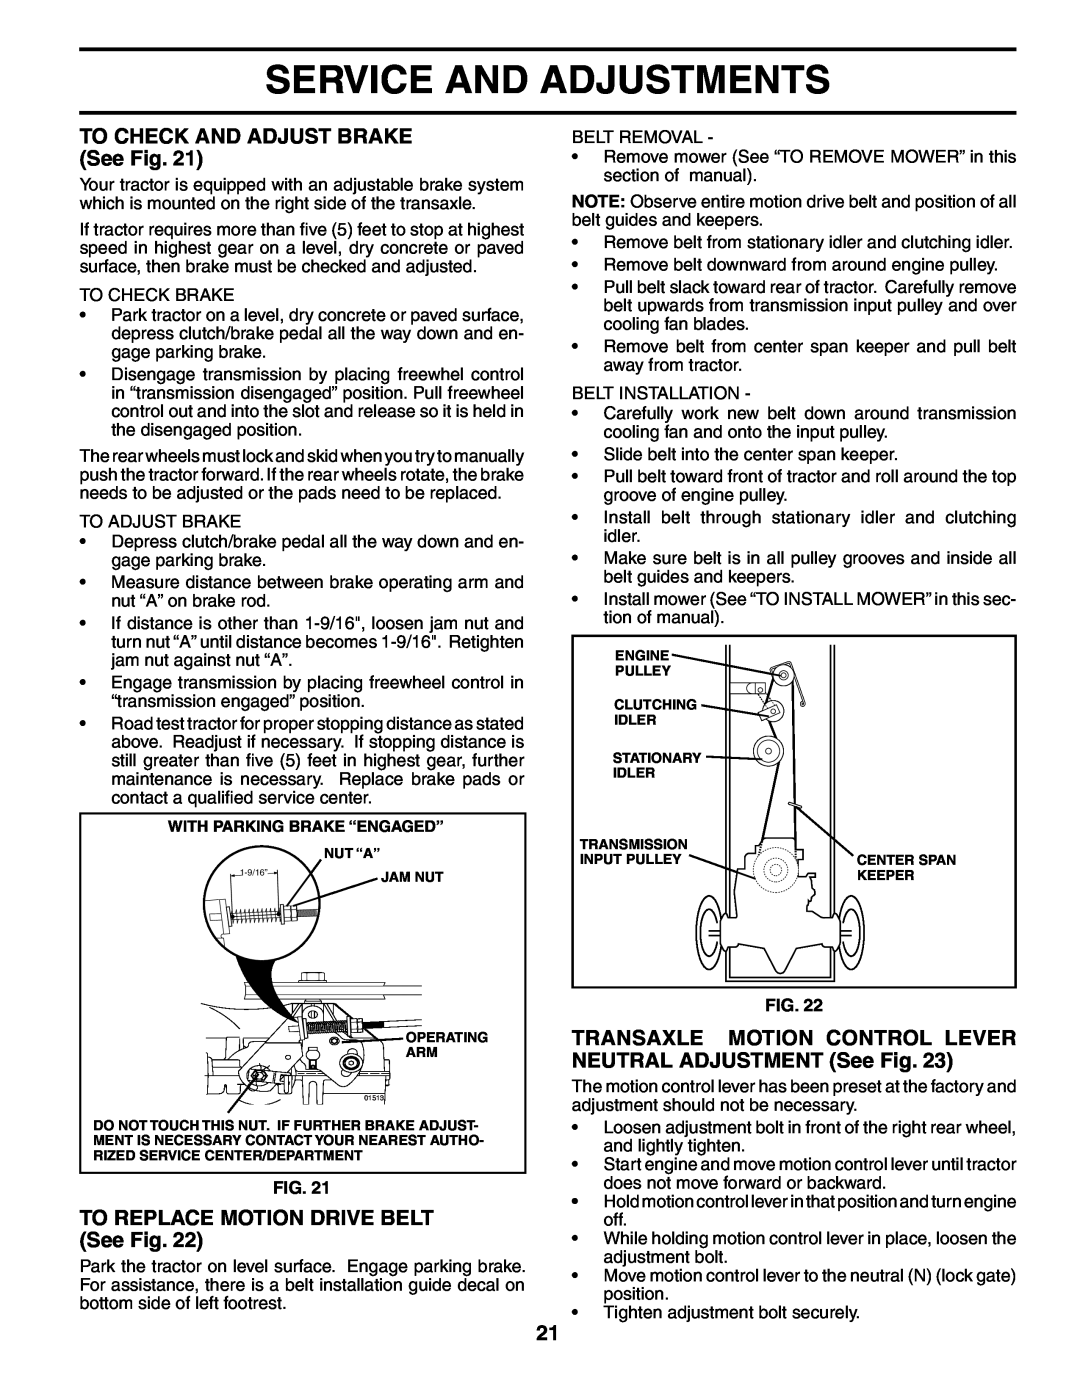 Poulan HDK19H42 manual TO CHECK AND ADJUST BRAKE See Fig, TO REPLACE MOTION DRIVE BELT See Fig, Service And Adjustments 